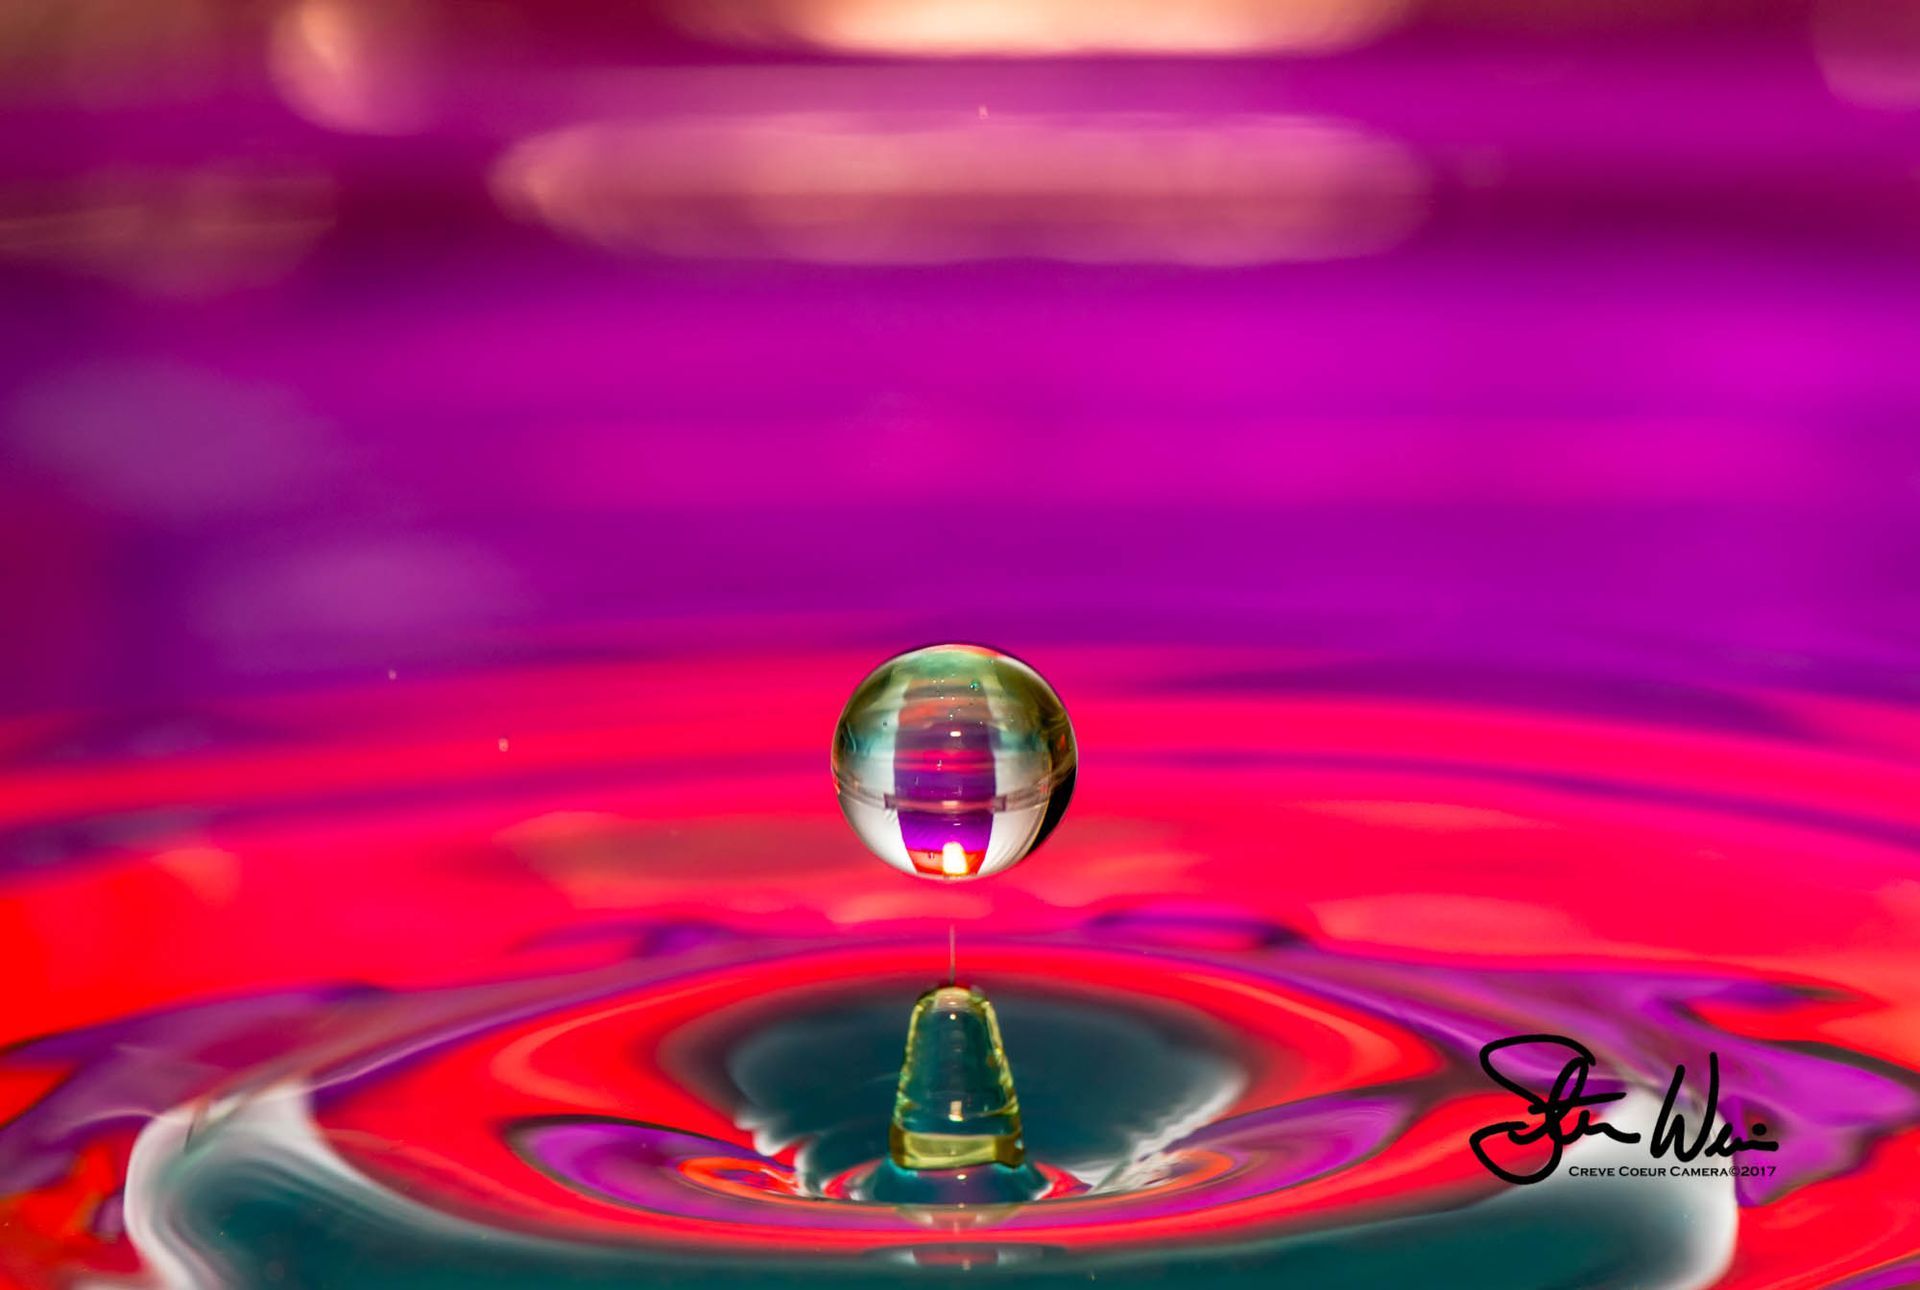 a drop of water is floating in a purple and red liquid .